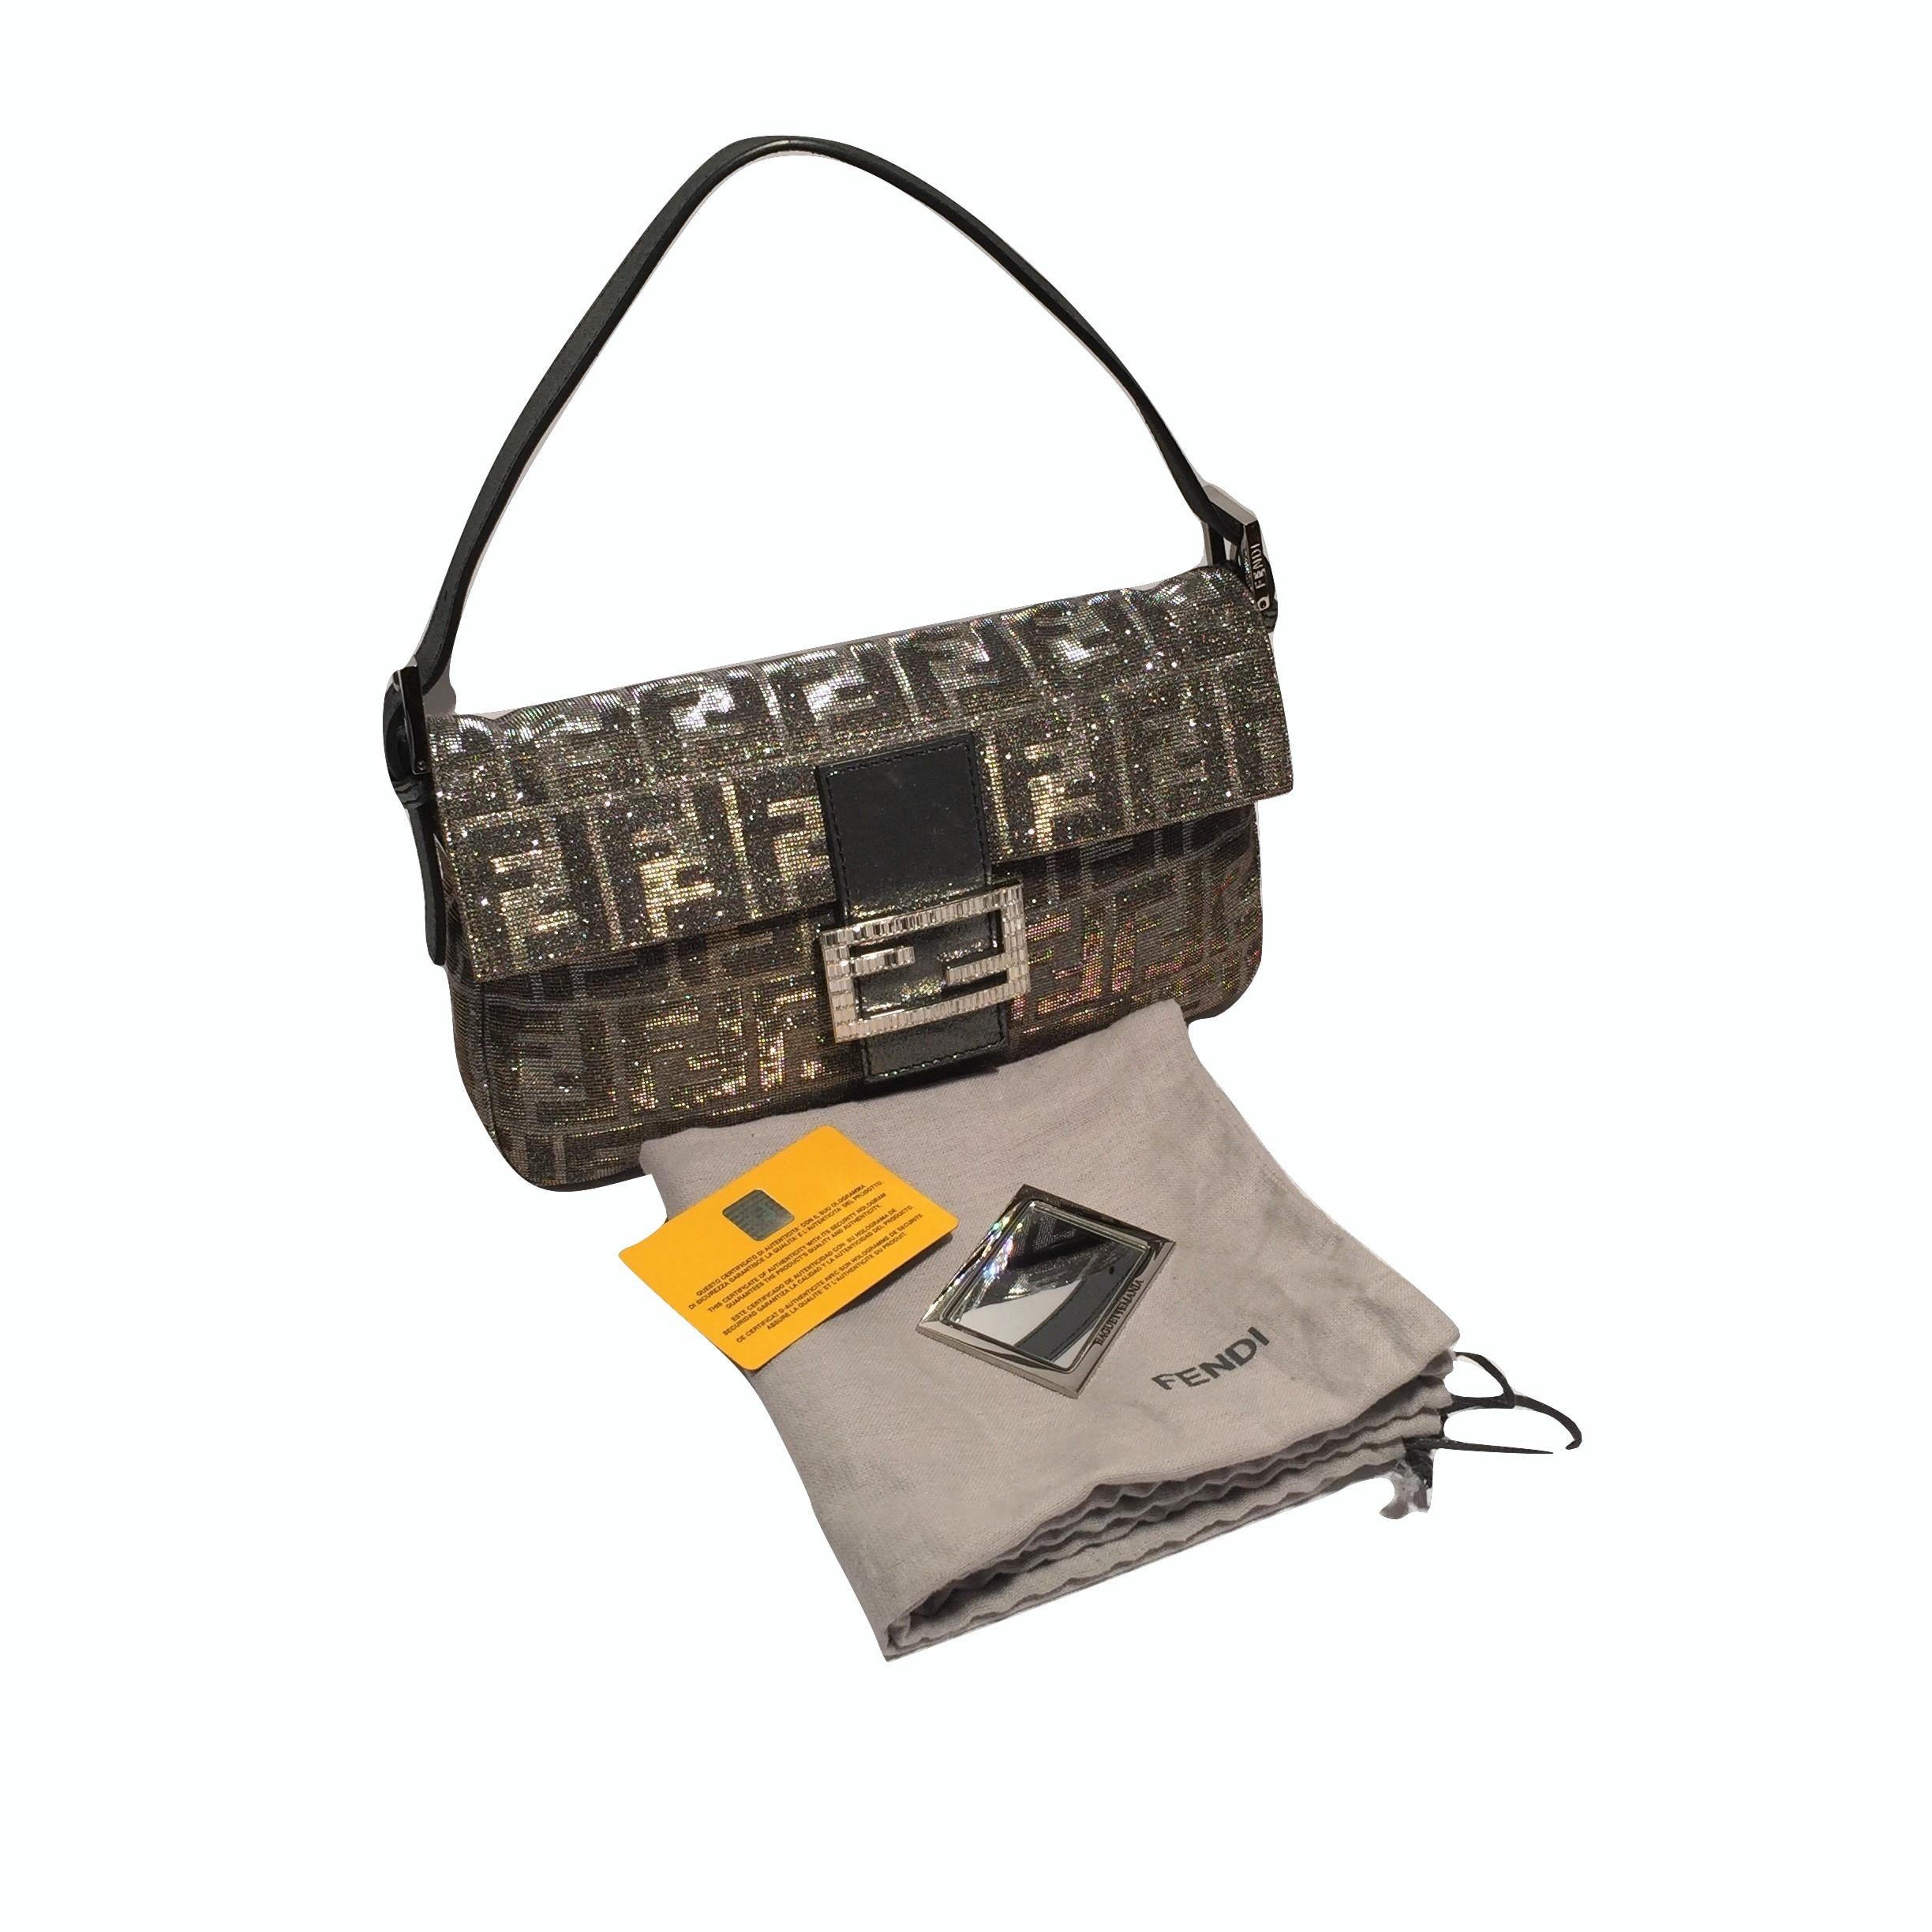 New Fendi Collectors Crystal Baguette Bag Featured in the 15th Anniversary Book 4